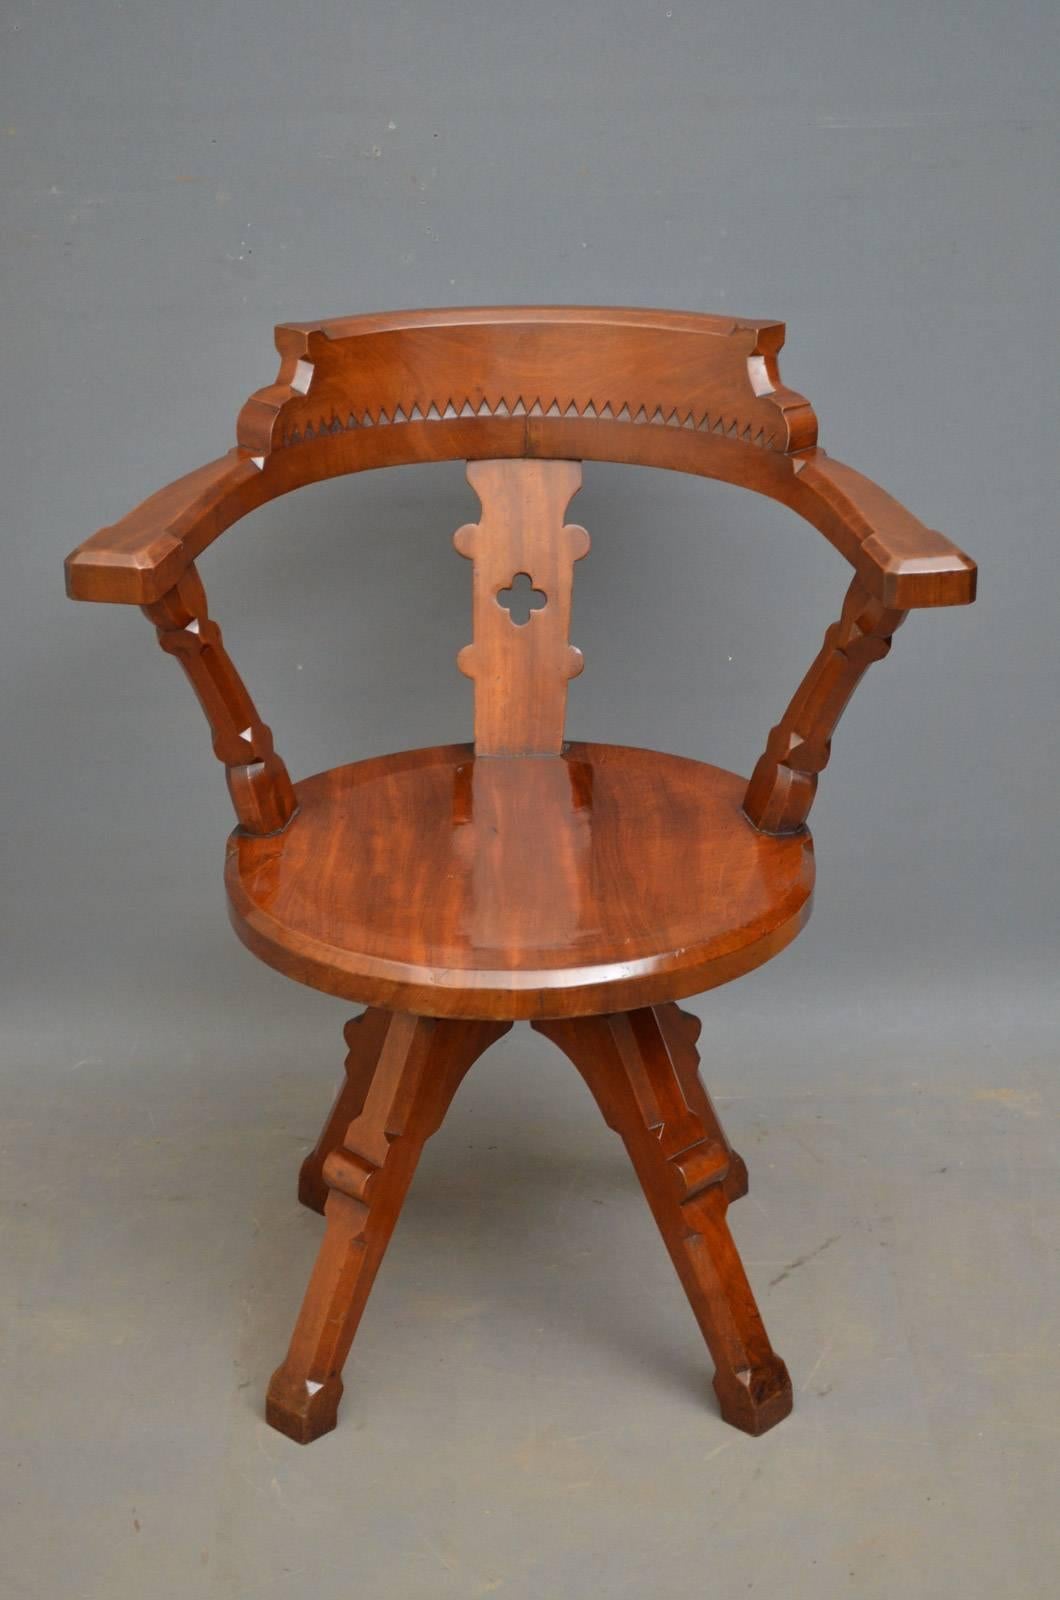 A00 A Victorian, solid mahogany, revolving desk chair with carved top rail above dog tooth decoration, carved centre splat and decorated open arms, all standing on substantial legs. This Gothic Revival desk chair is in wonderful original condition